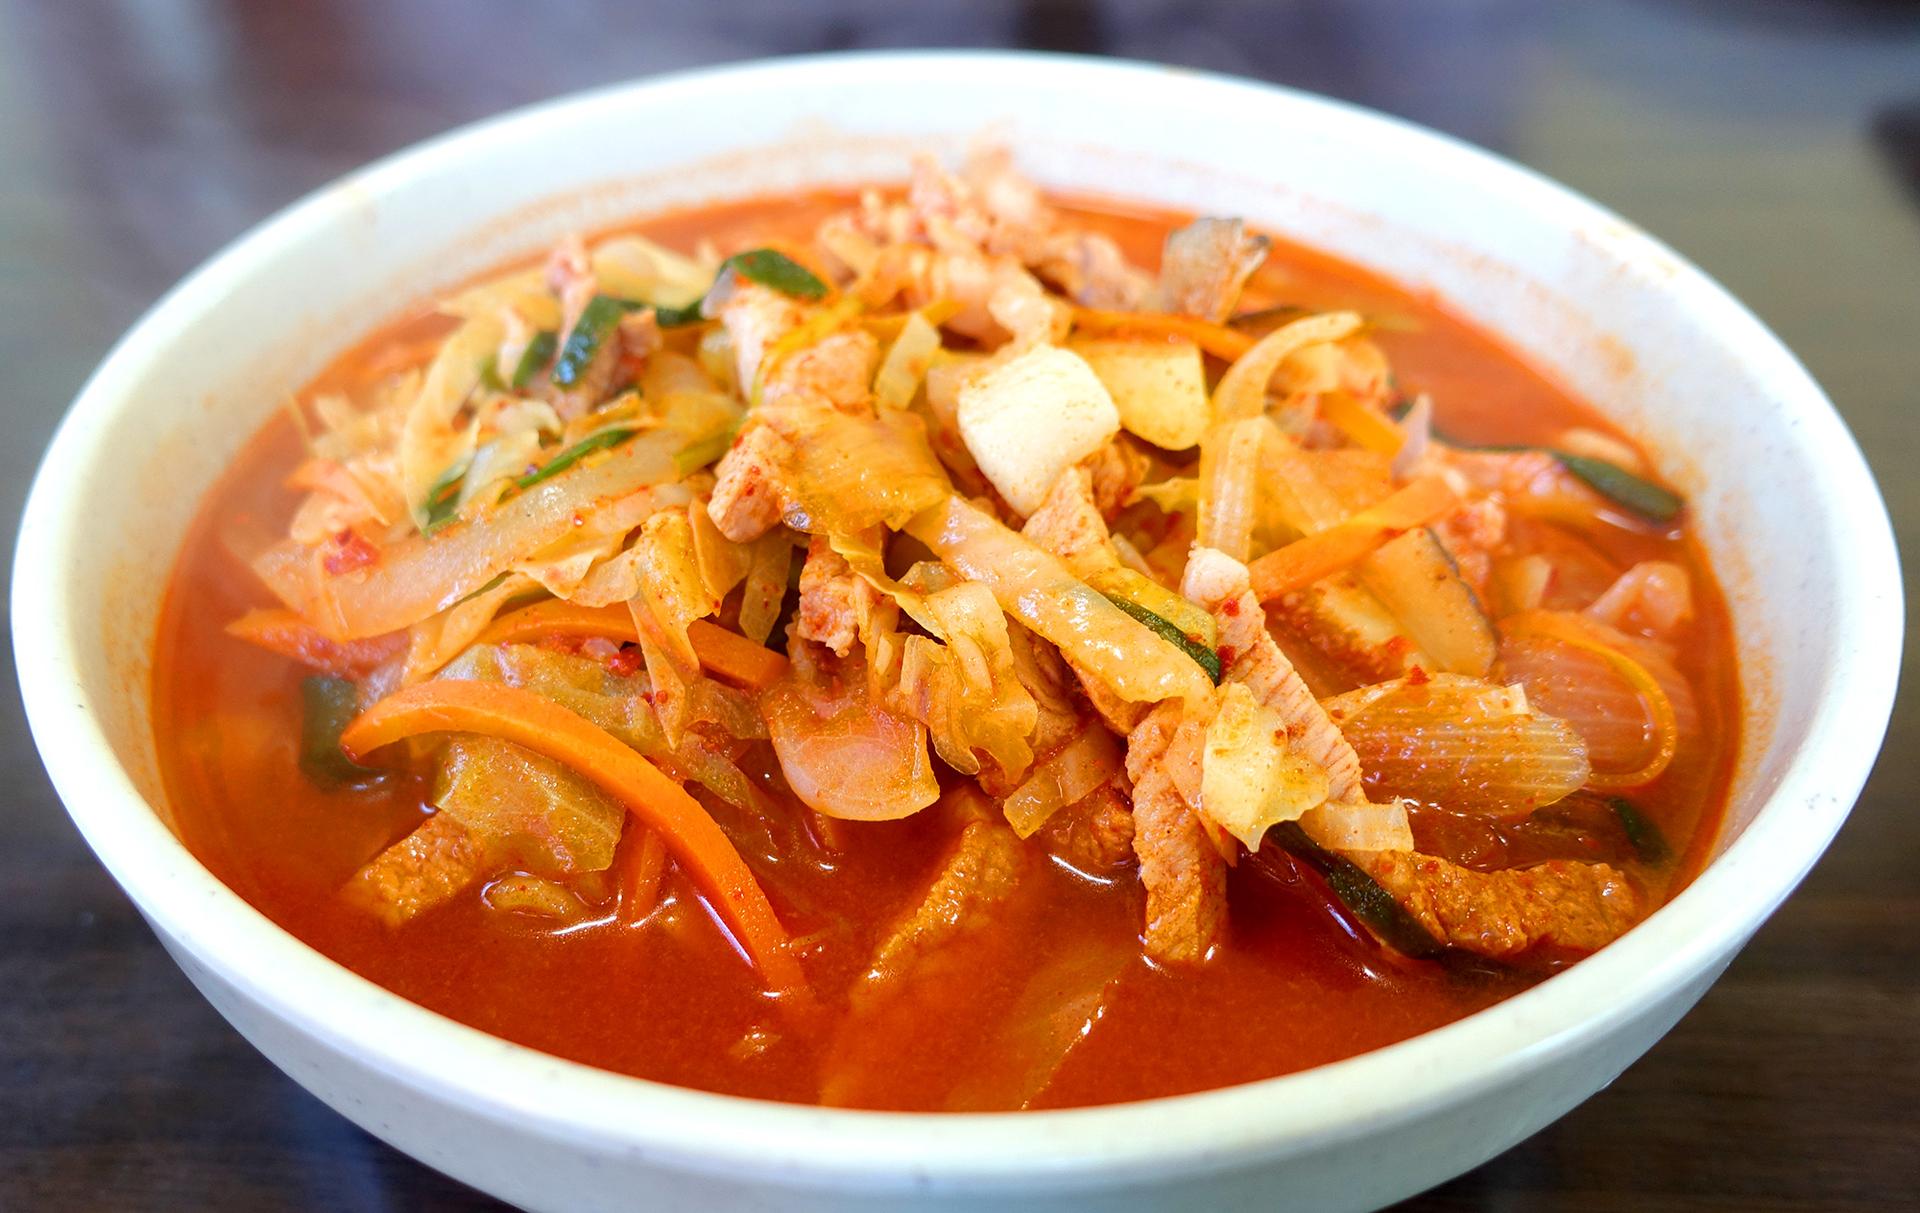 Seafood jjambong or stew with ingredients like shrimp, vegetables and spices for delivery in Seoul.